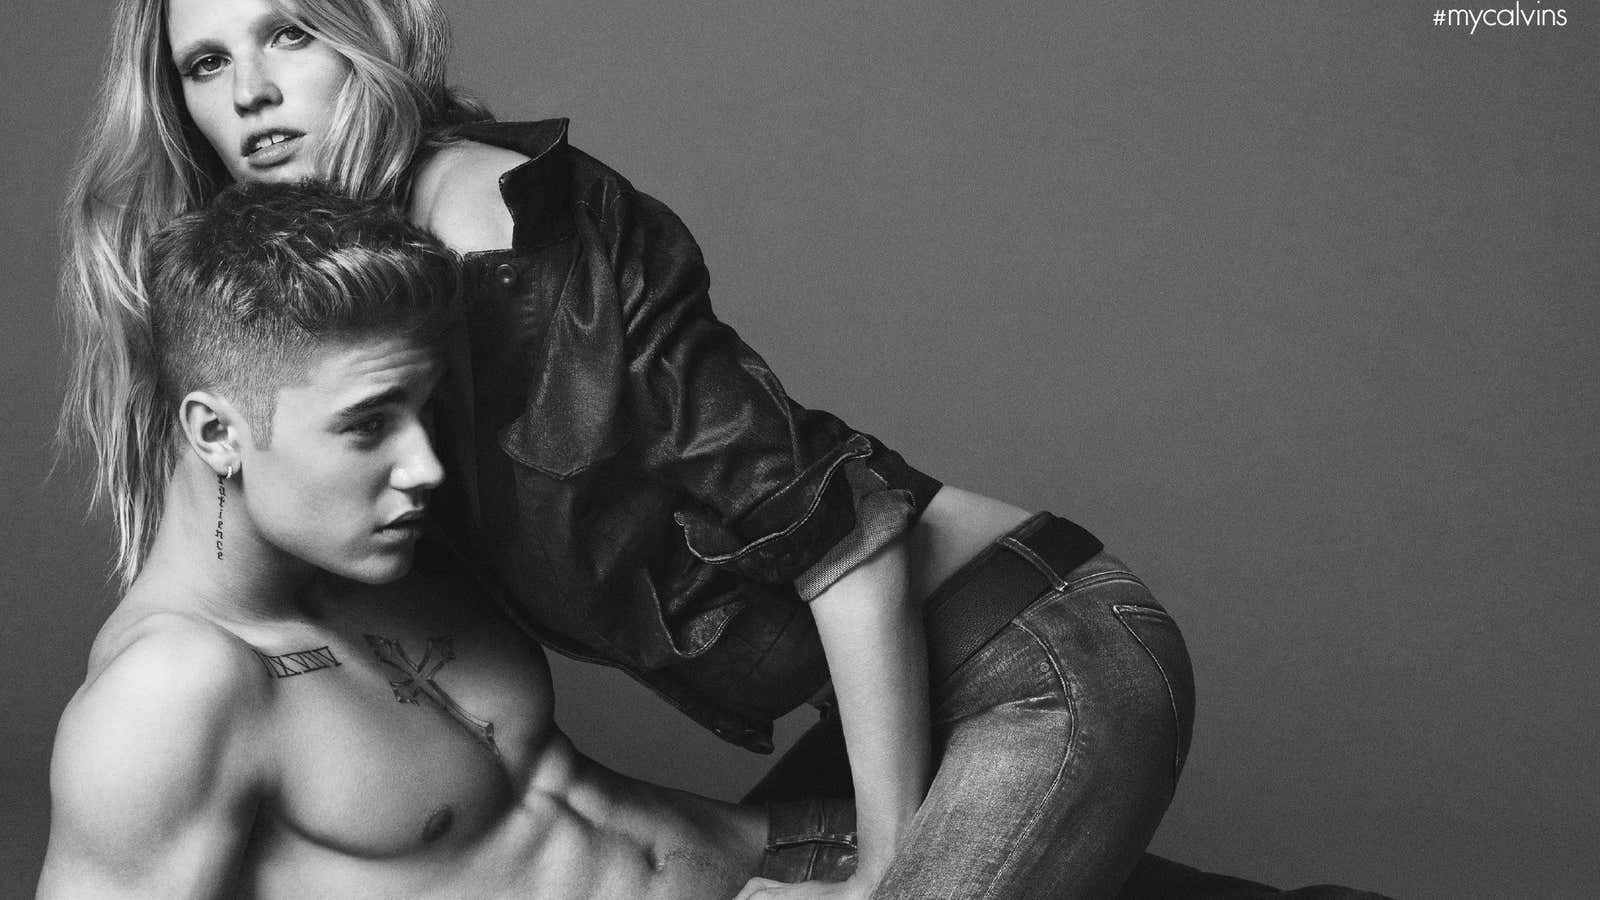 Even its campaign with Justin Bieber and Lara Stone couldn’t save Calvin Klein’s international sales.